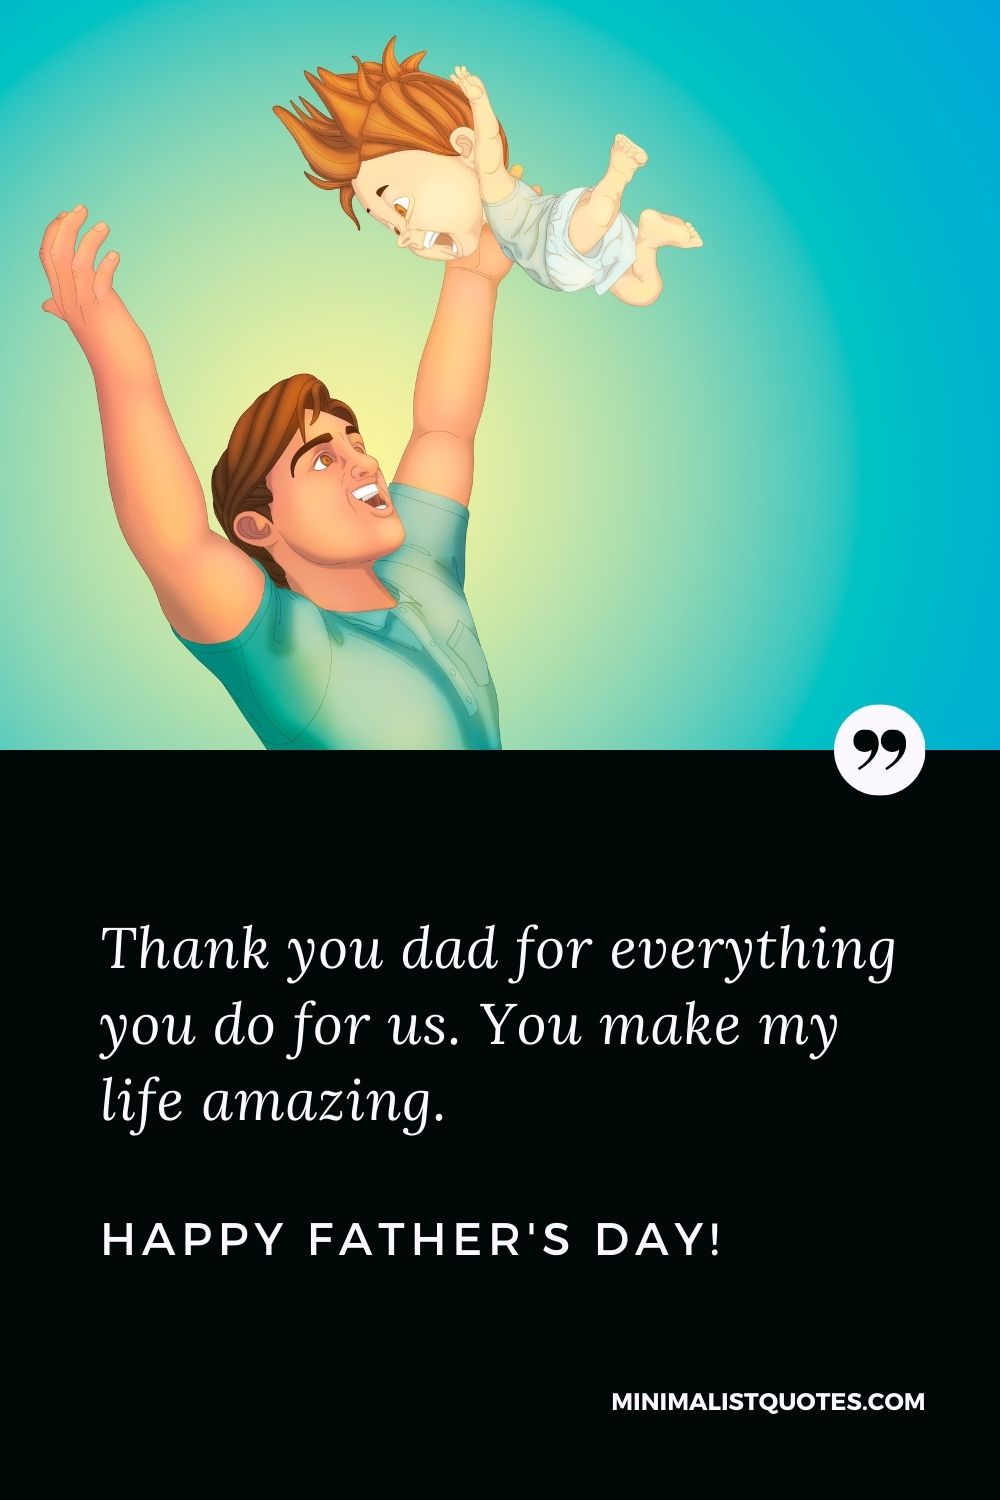 Father's Day Quote, Wish & Message With Image: Thank you dad for everything you do for us. You make my life amazing. Happy Fathers Day!